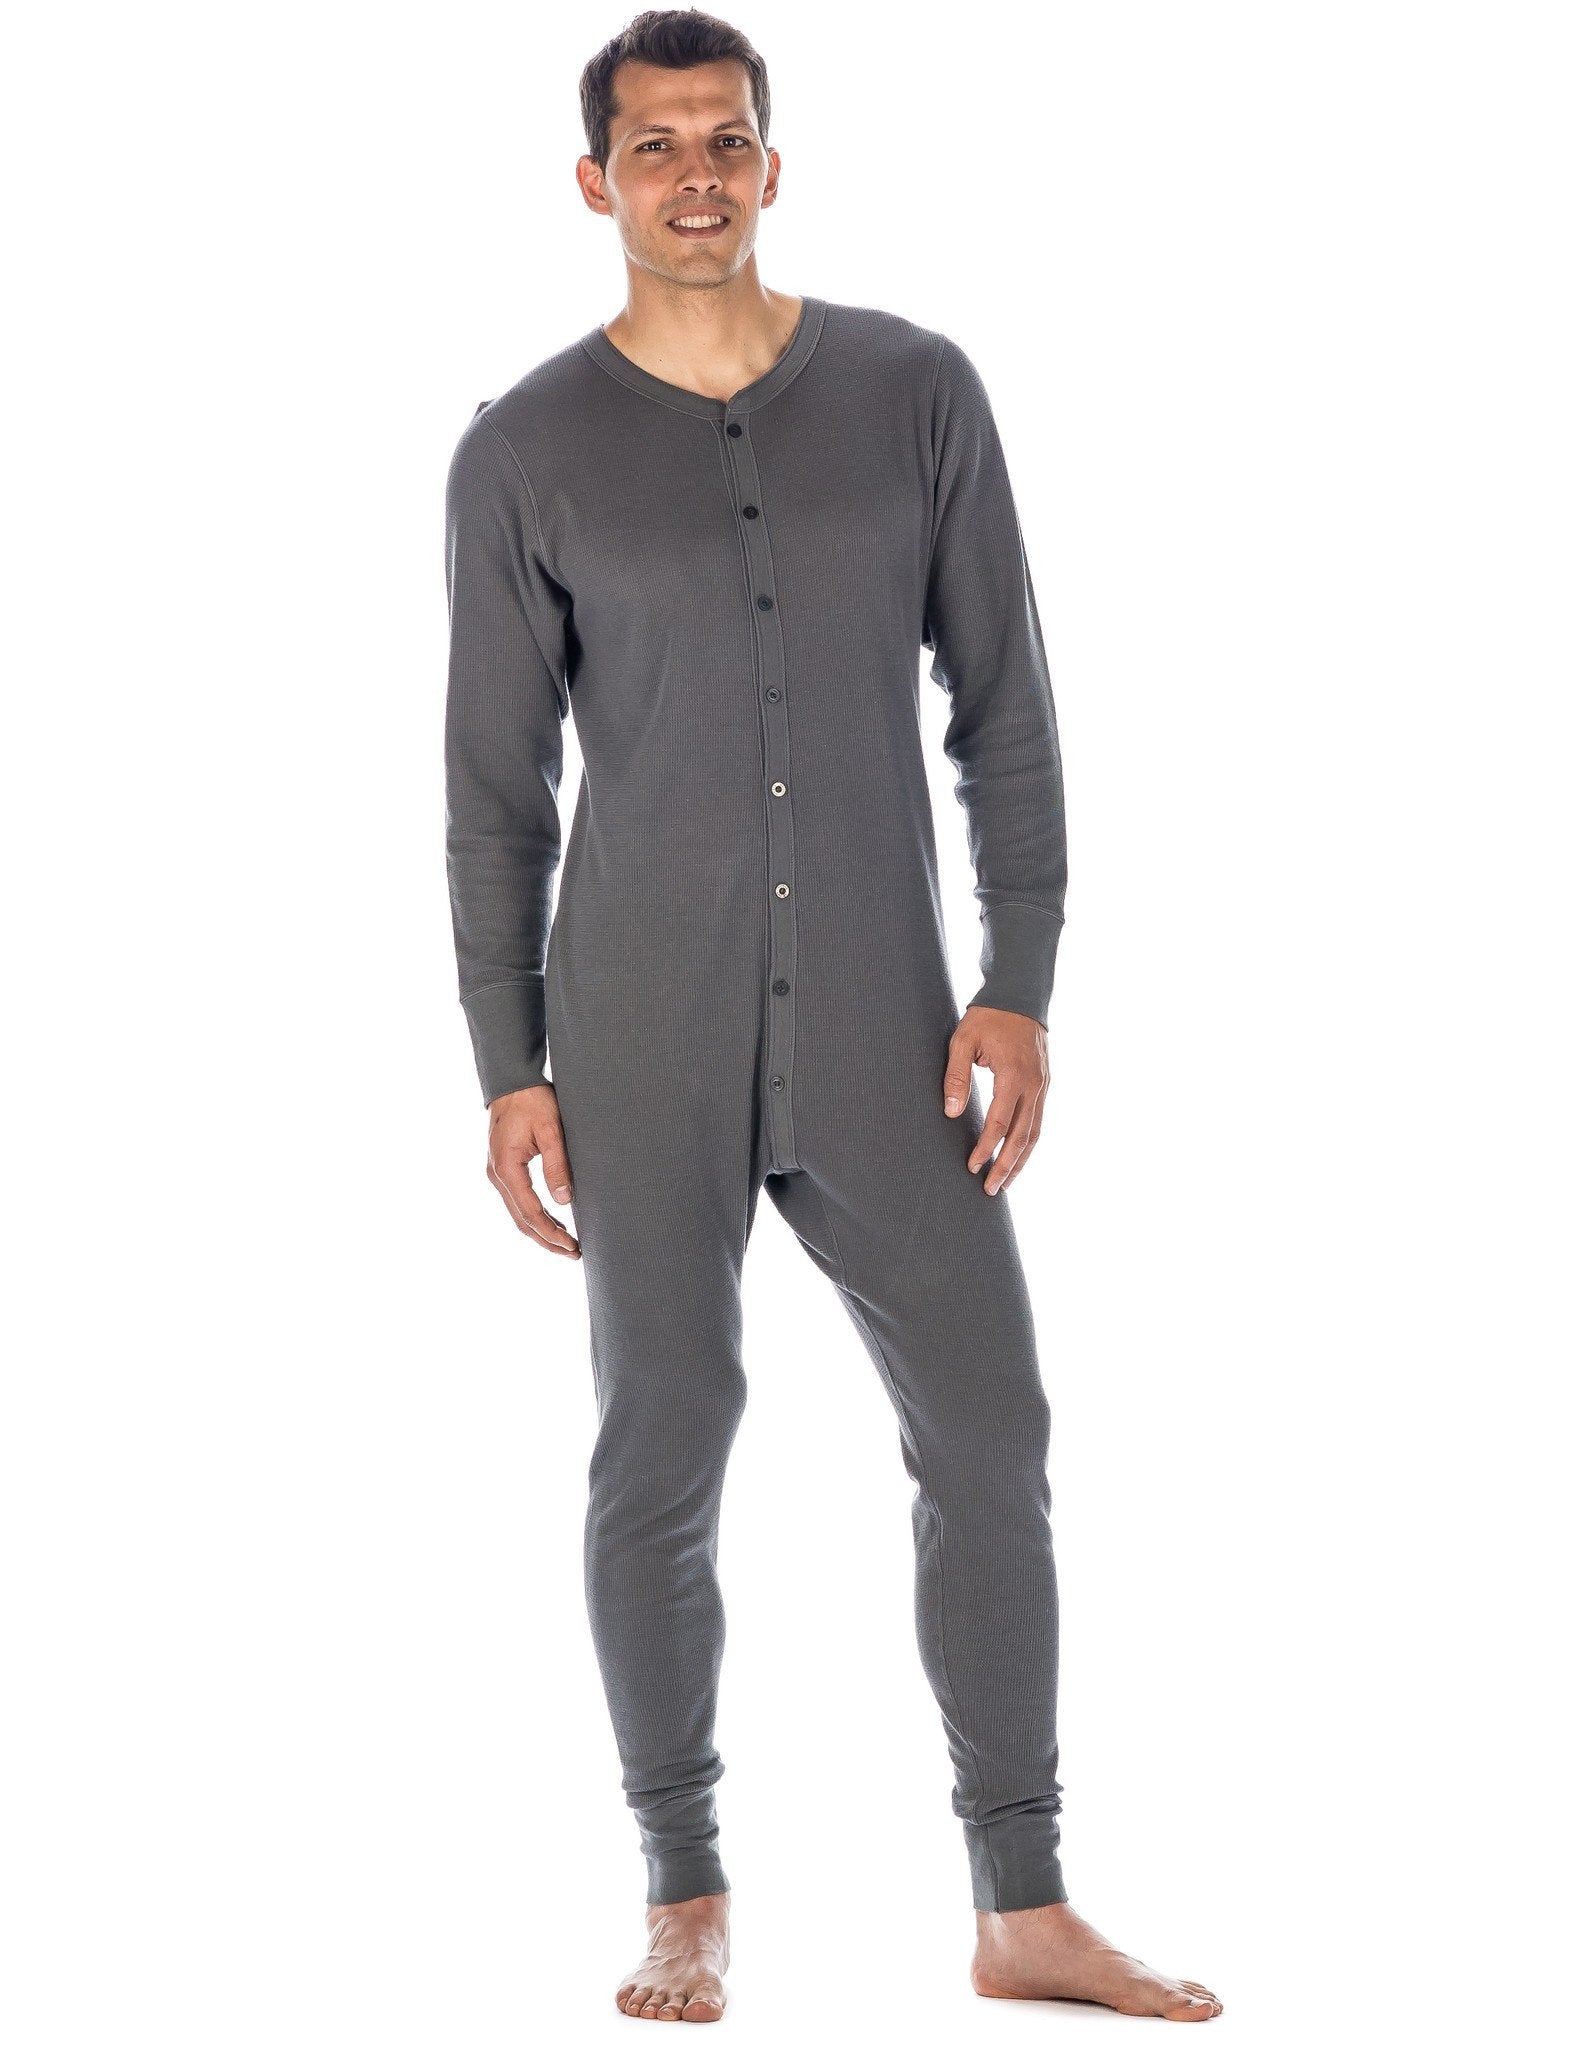 Men's Waffle Knit Thermal Union Suit - Charcoal